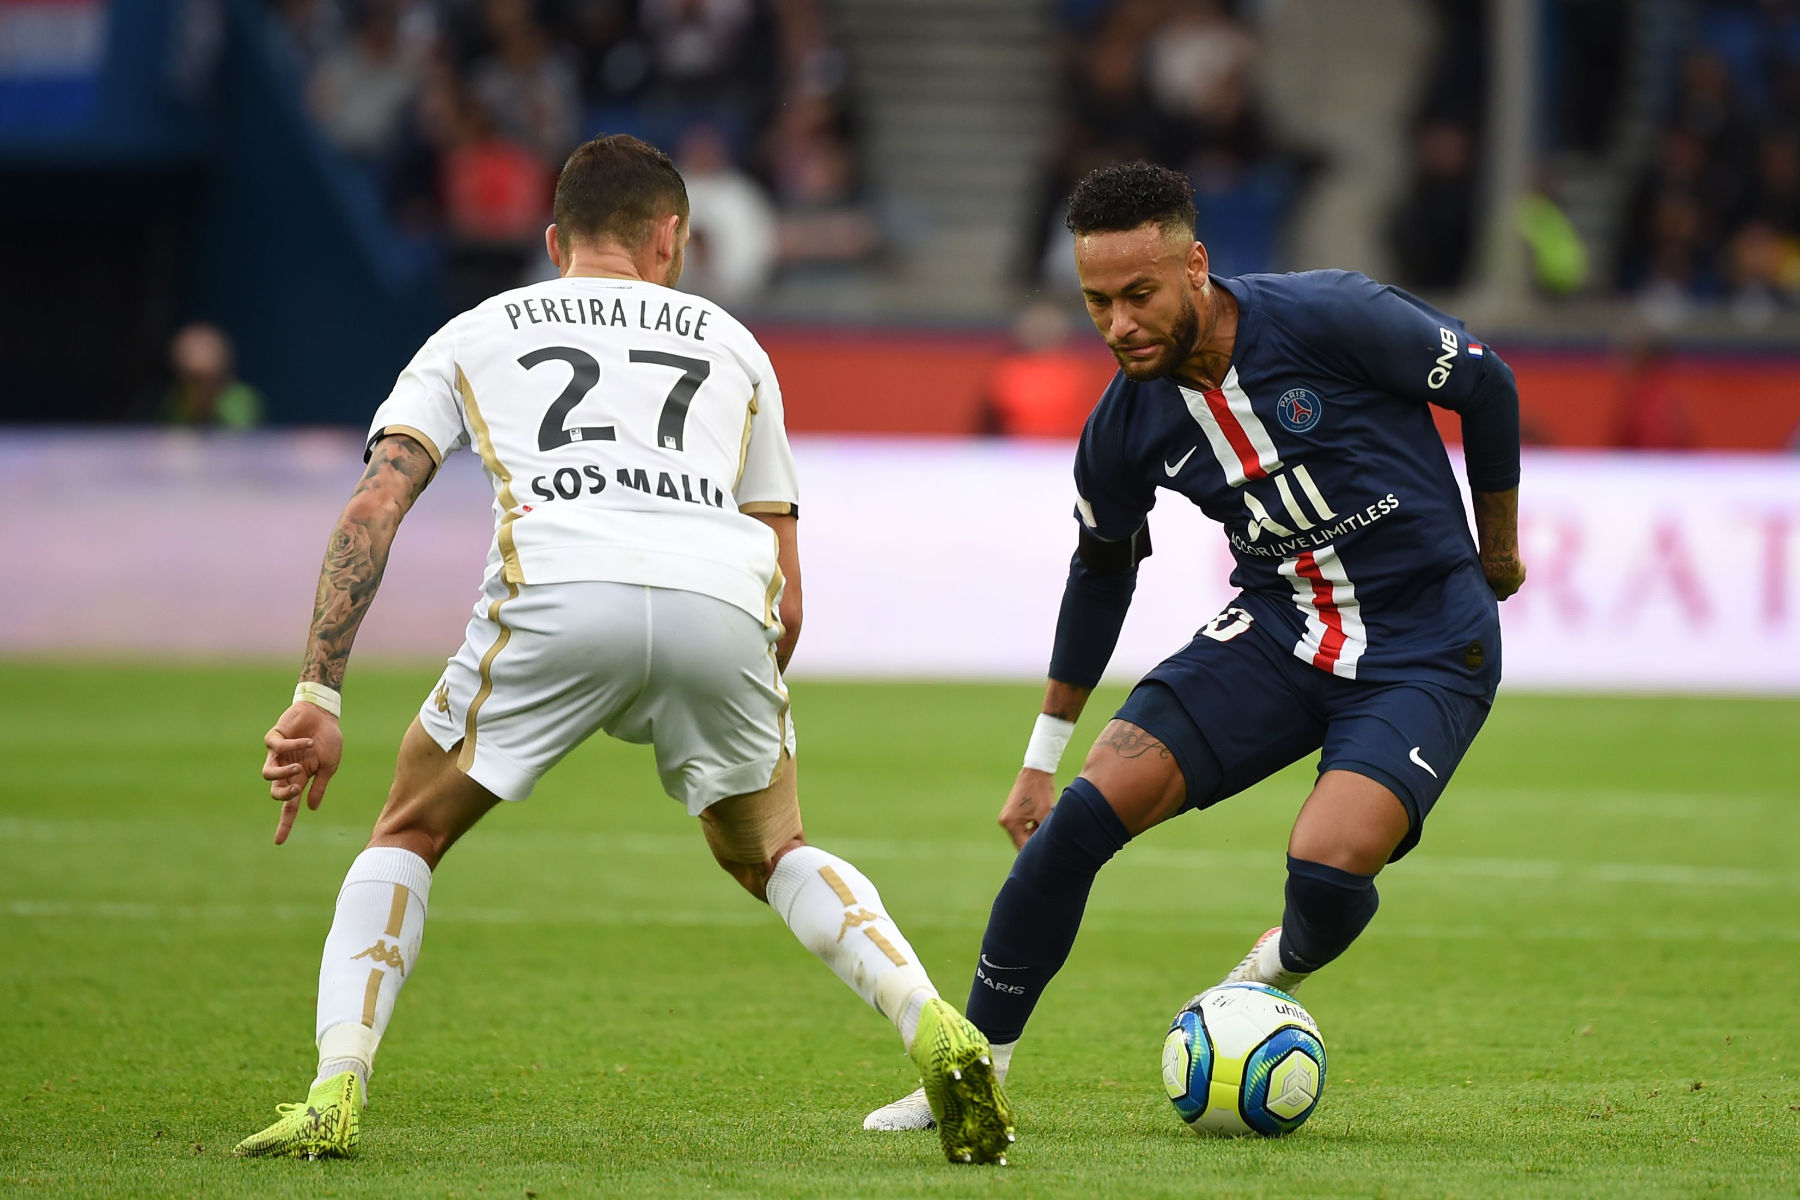 Video: Neymar Rounds Keeper and Scores PSG's 4th Goal Against Angers